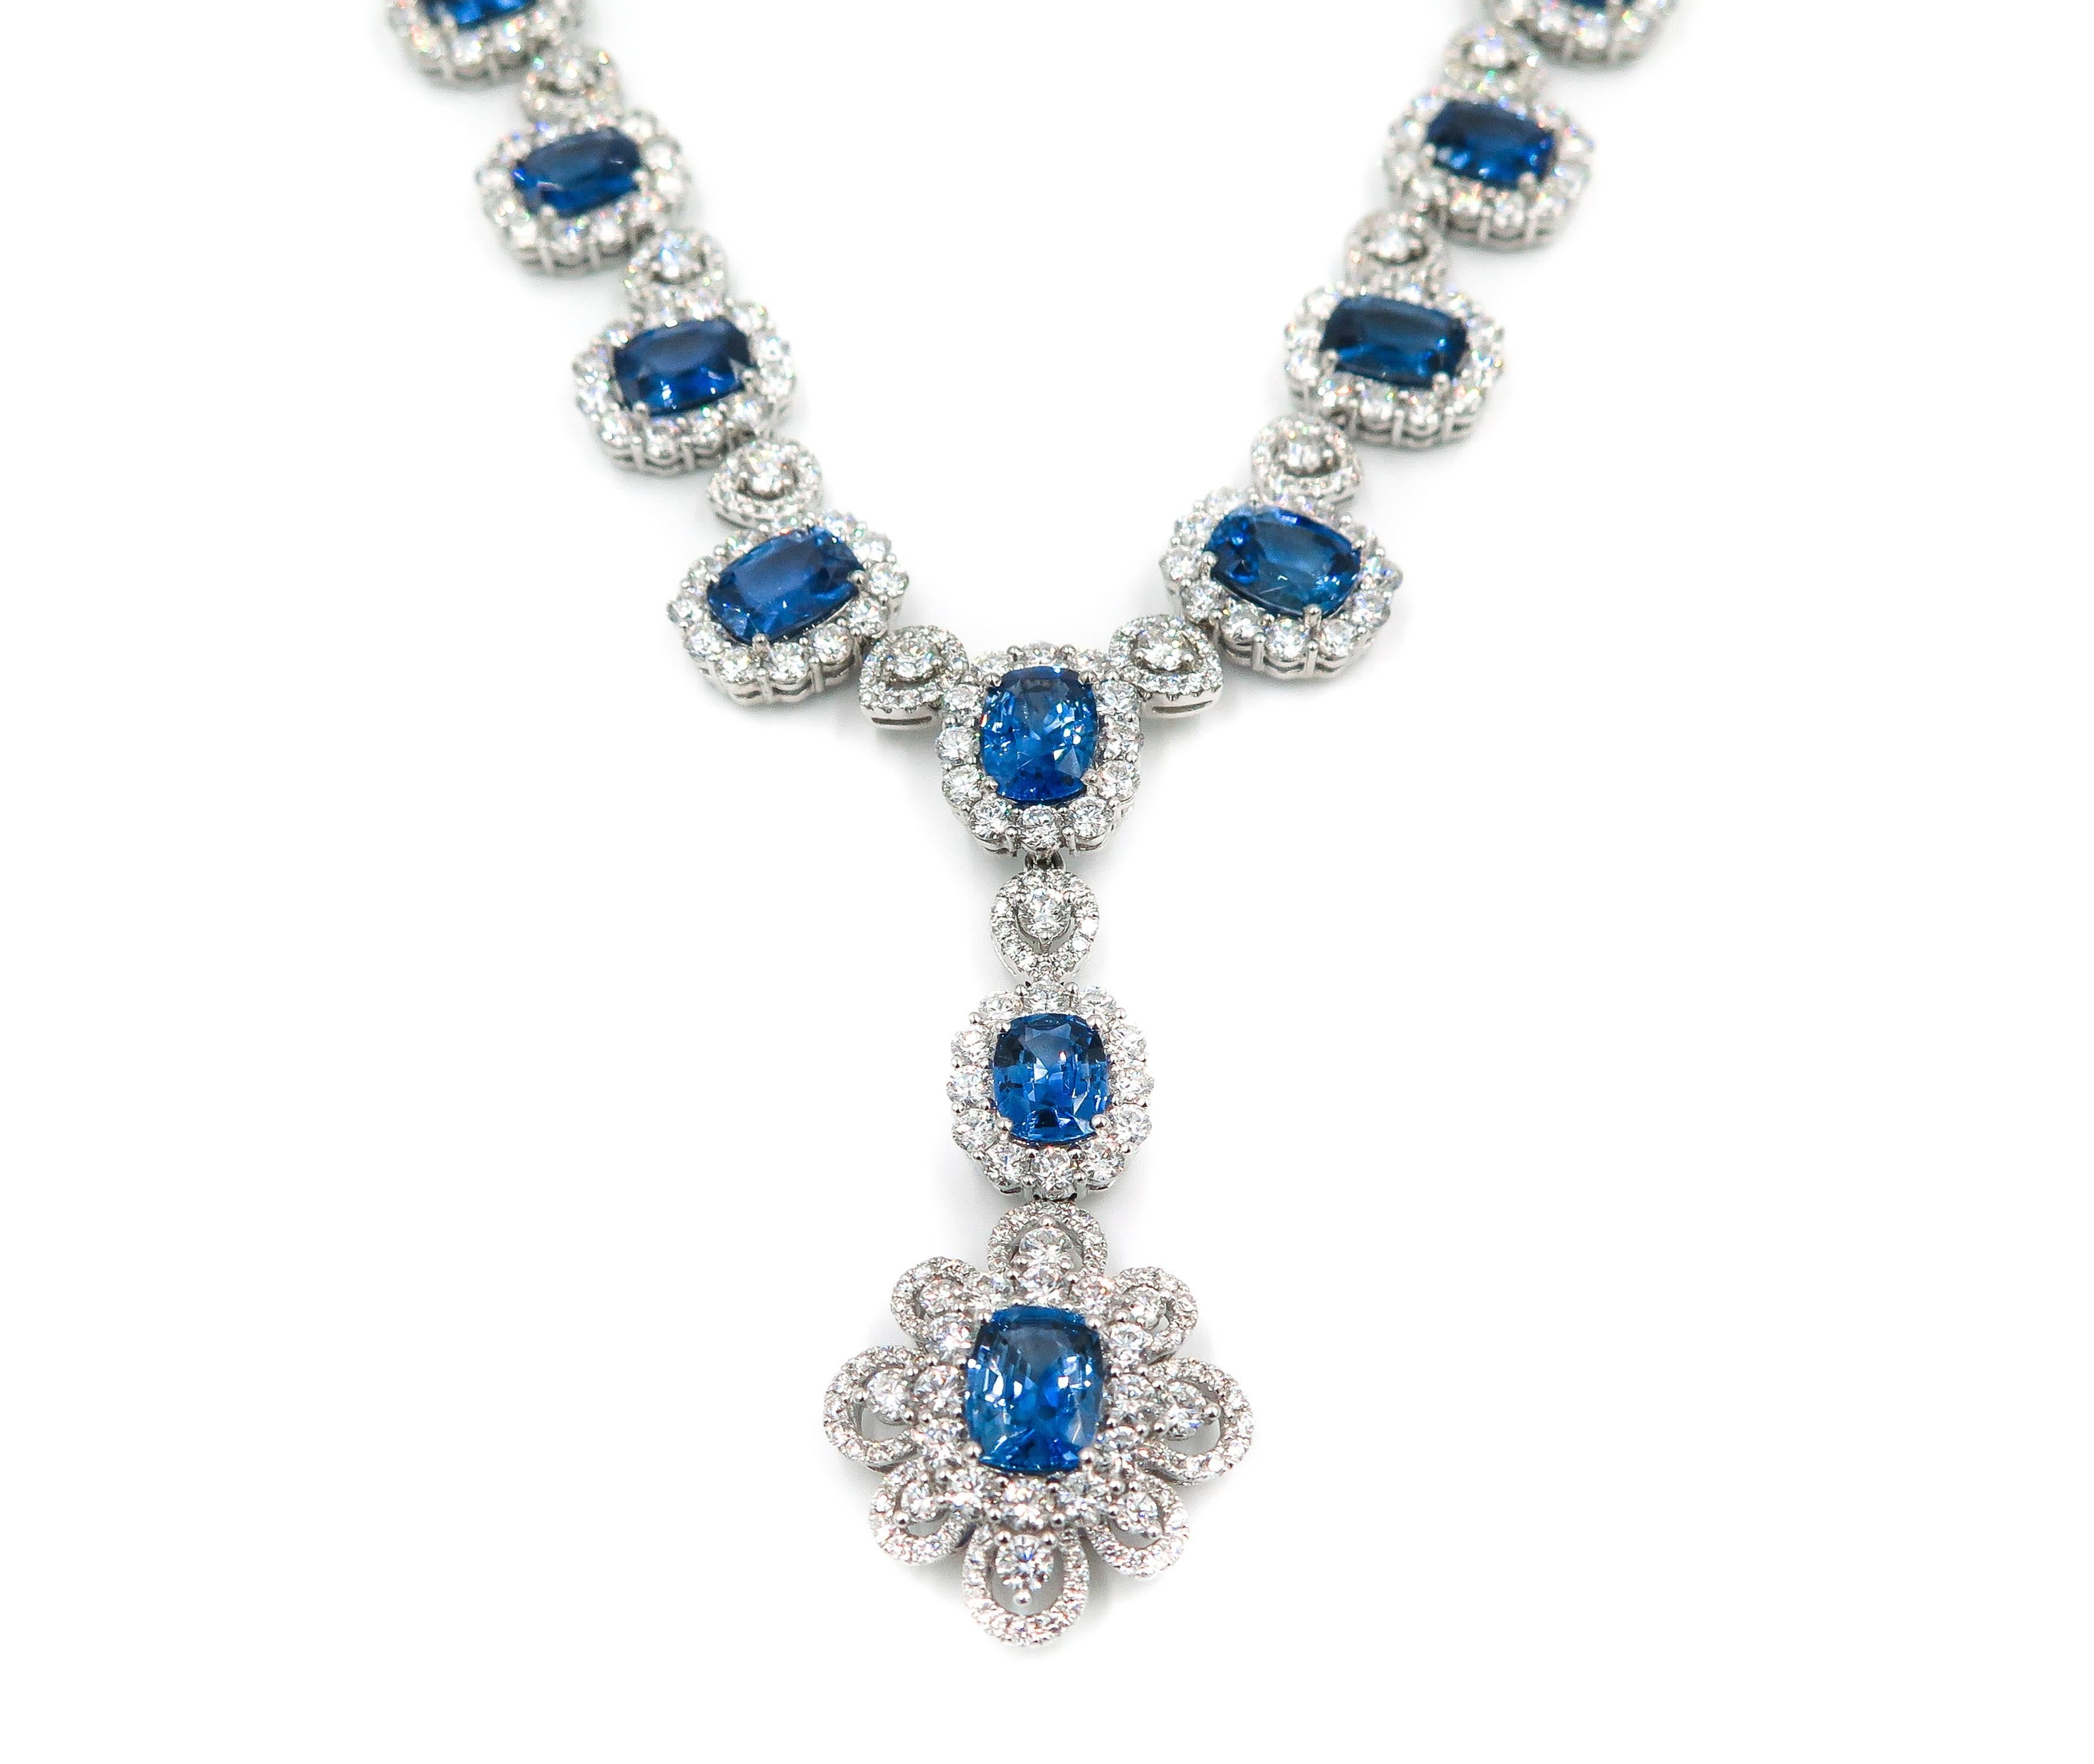 The Stylistic design of this necklace is the main feature.   
The contemporary style: classic and feminine is well expressed through the perfectly matched blue sapphires surrounded by gorgeous white diamonds.  
The center drop is removable to